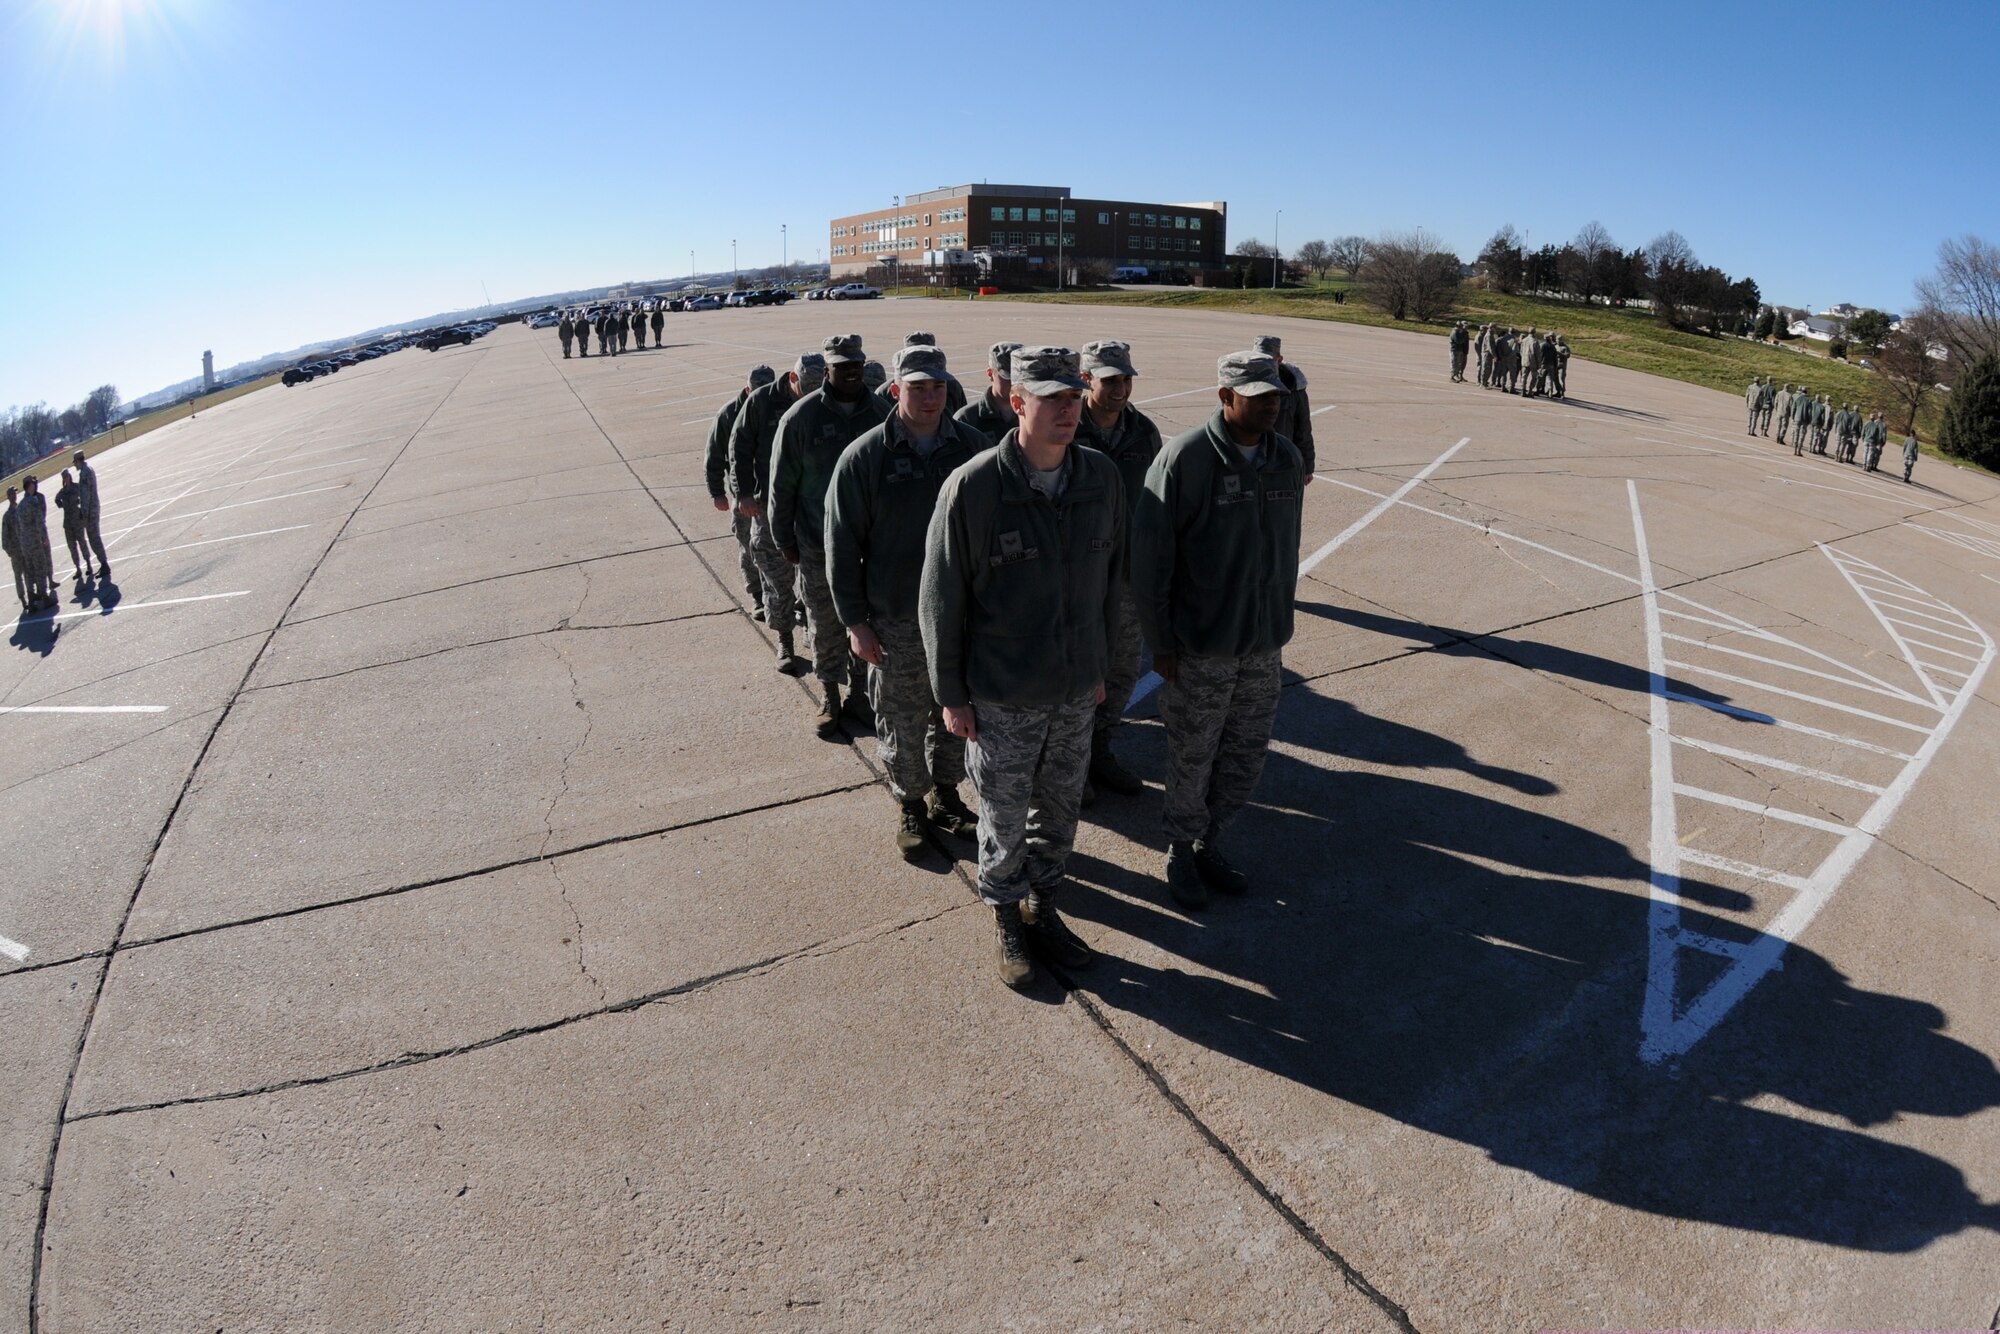 Students at the James M. McCoy Airman Leadership School at Offutt Air Force Base, Nebraska, practice marching in the parking at the school house on December 3, 2015. Airmen practice marching, giving speeches and writing papers at ALS, a requirement to make the rank of staff sergeant.  (U.S. National Guard photo by Staff Sgt. Daniel S. Ter Haar/Released)